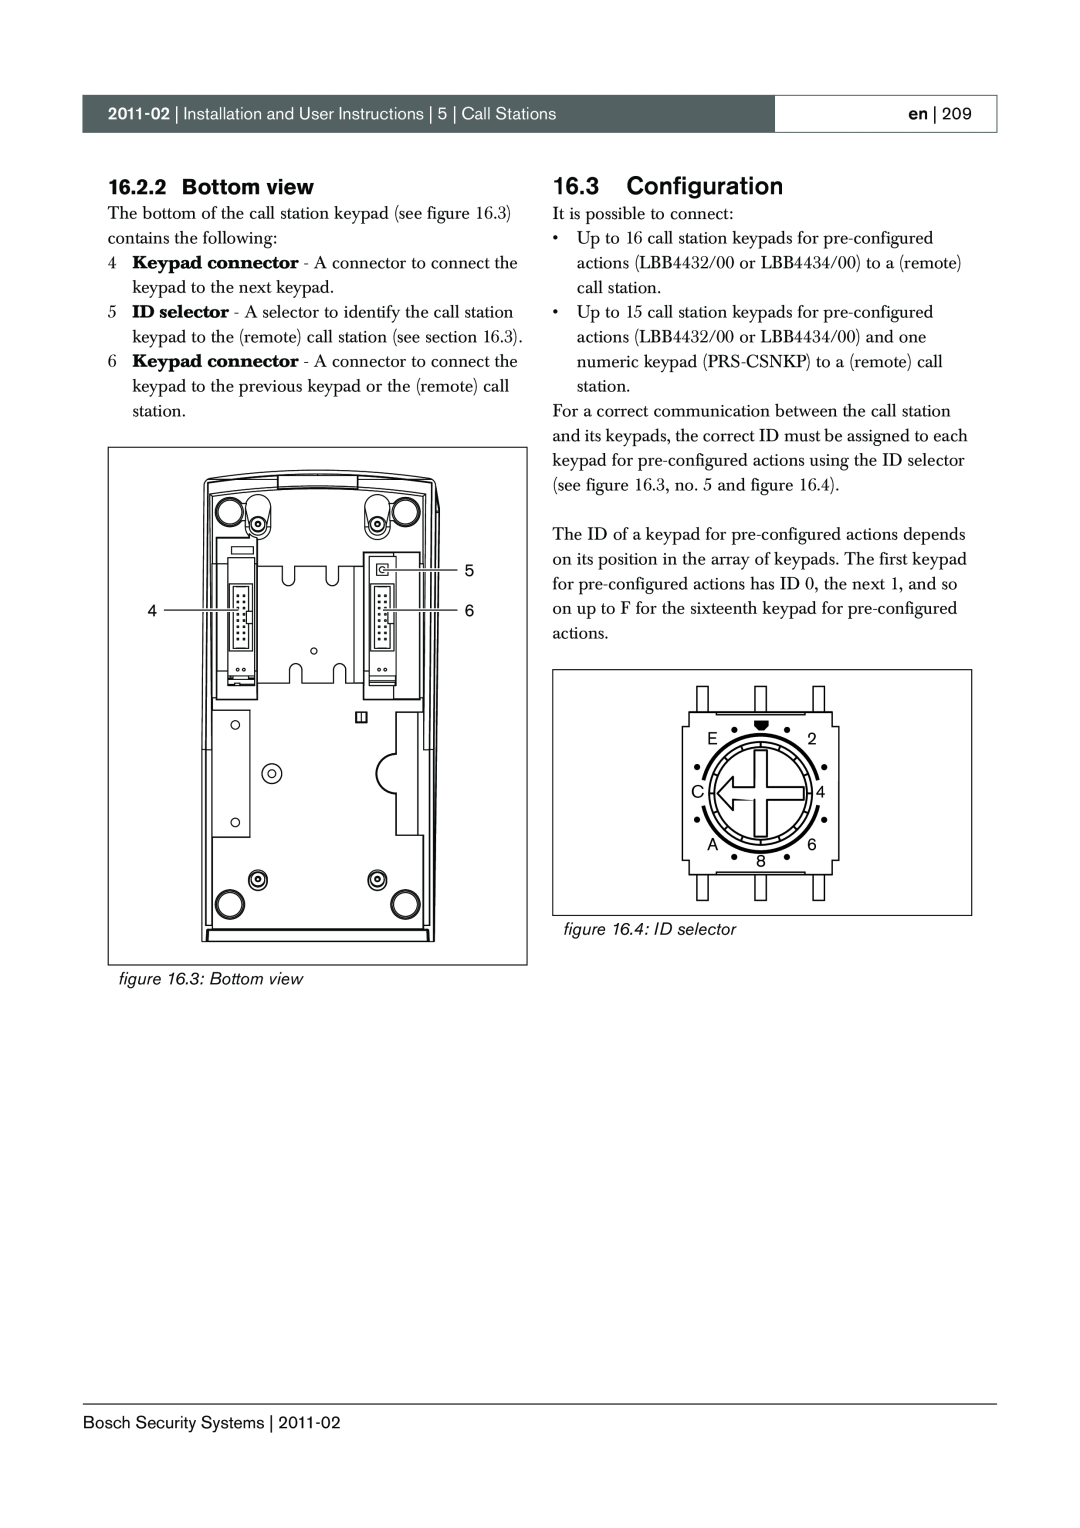 Bosch Appliances 3.5 manual 16.3Configuration, 3 Bottom view, 4: ID selector 